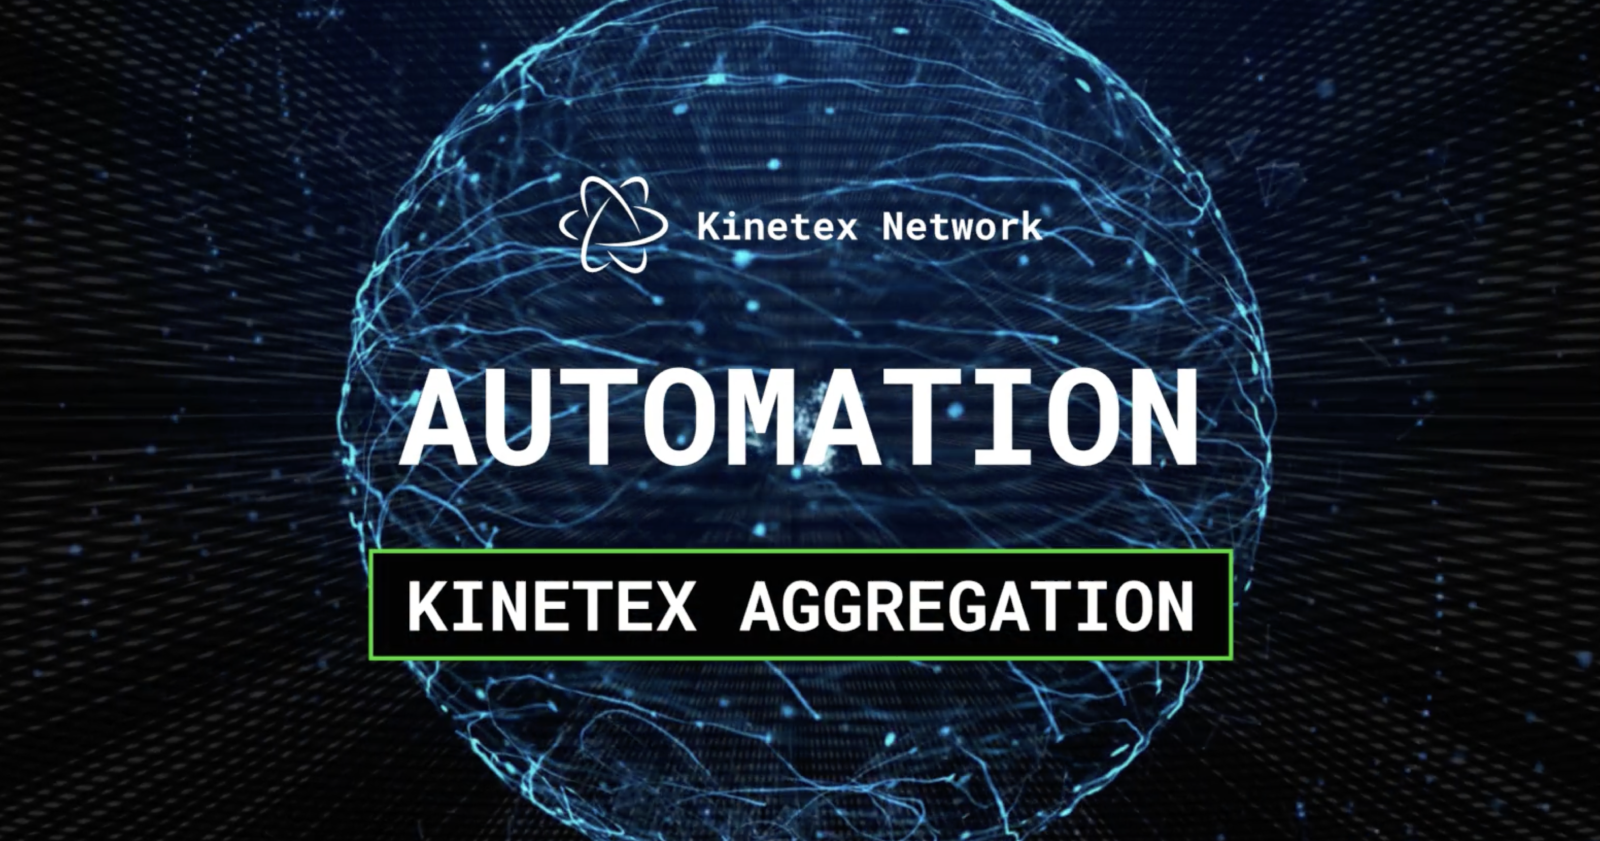 Kinetex’s Liquidity Aggregation Mode: Automation with Relay Nodes